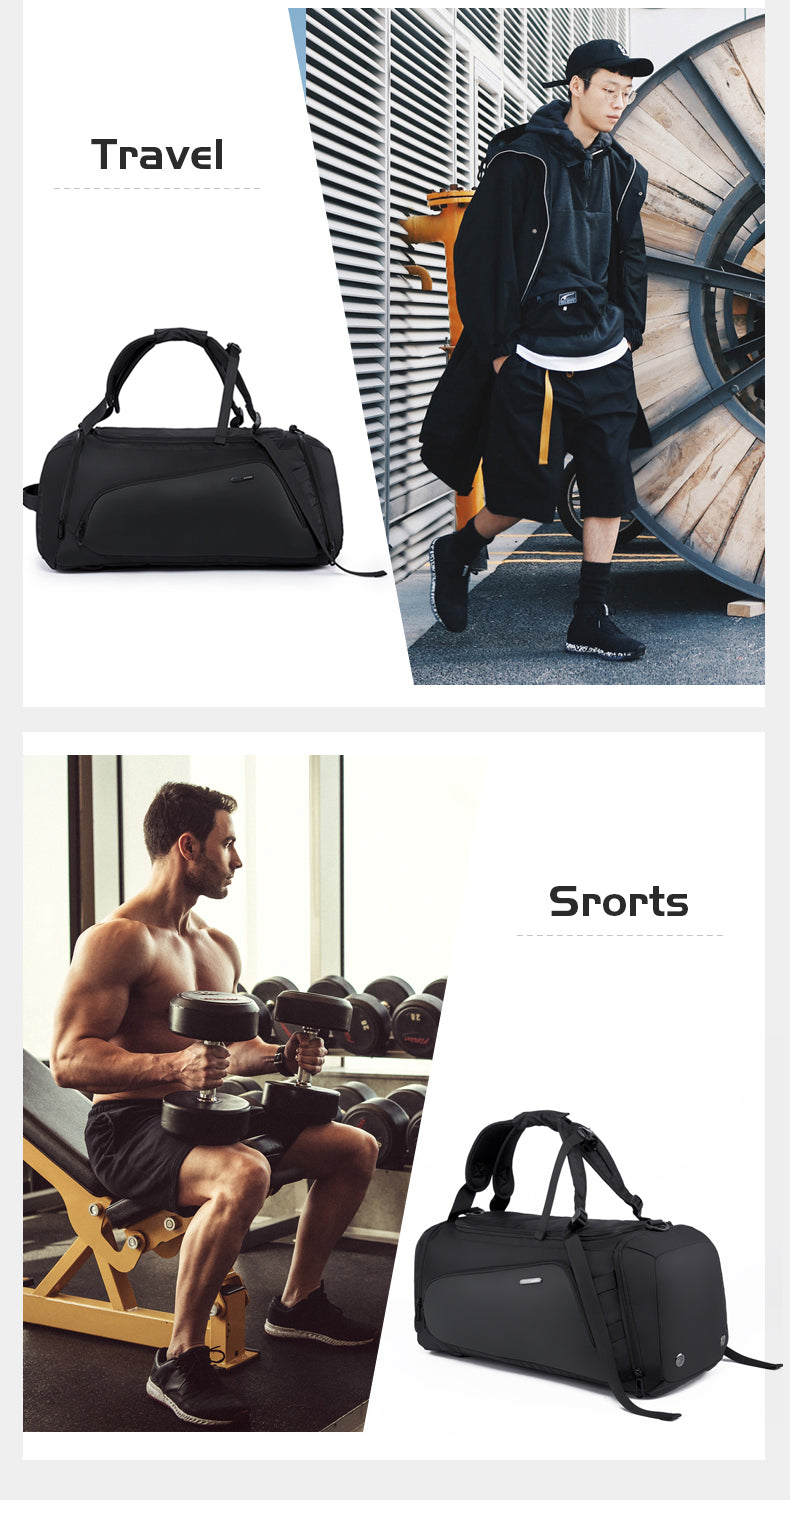 Any occasions: Our gym duffel bag is a perfect reliable holdall bag for a workout, travel, weekender away, sports activity like fitness, swimming, yoga, tennis,basketball etc. Your best choice for gym sports bag/school duffle bag/ travel duffel bag/ overnight bag/ holdall bag/ weekender bag/sport holdall bag/training holdall, etc.